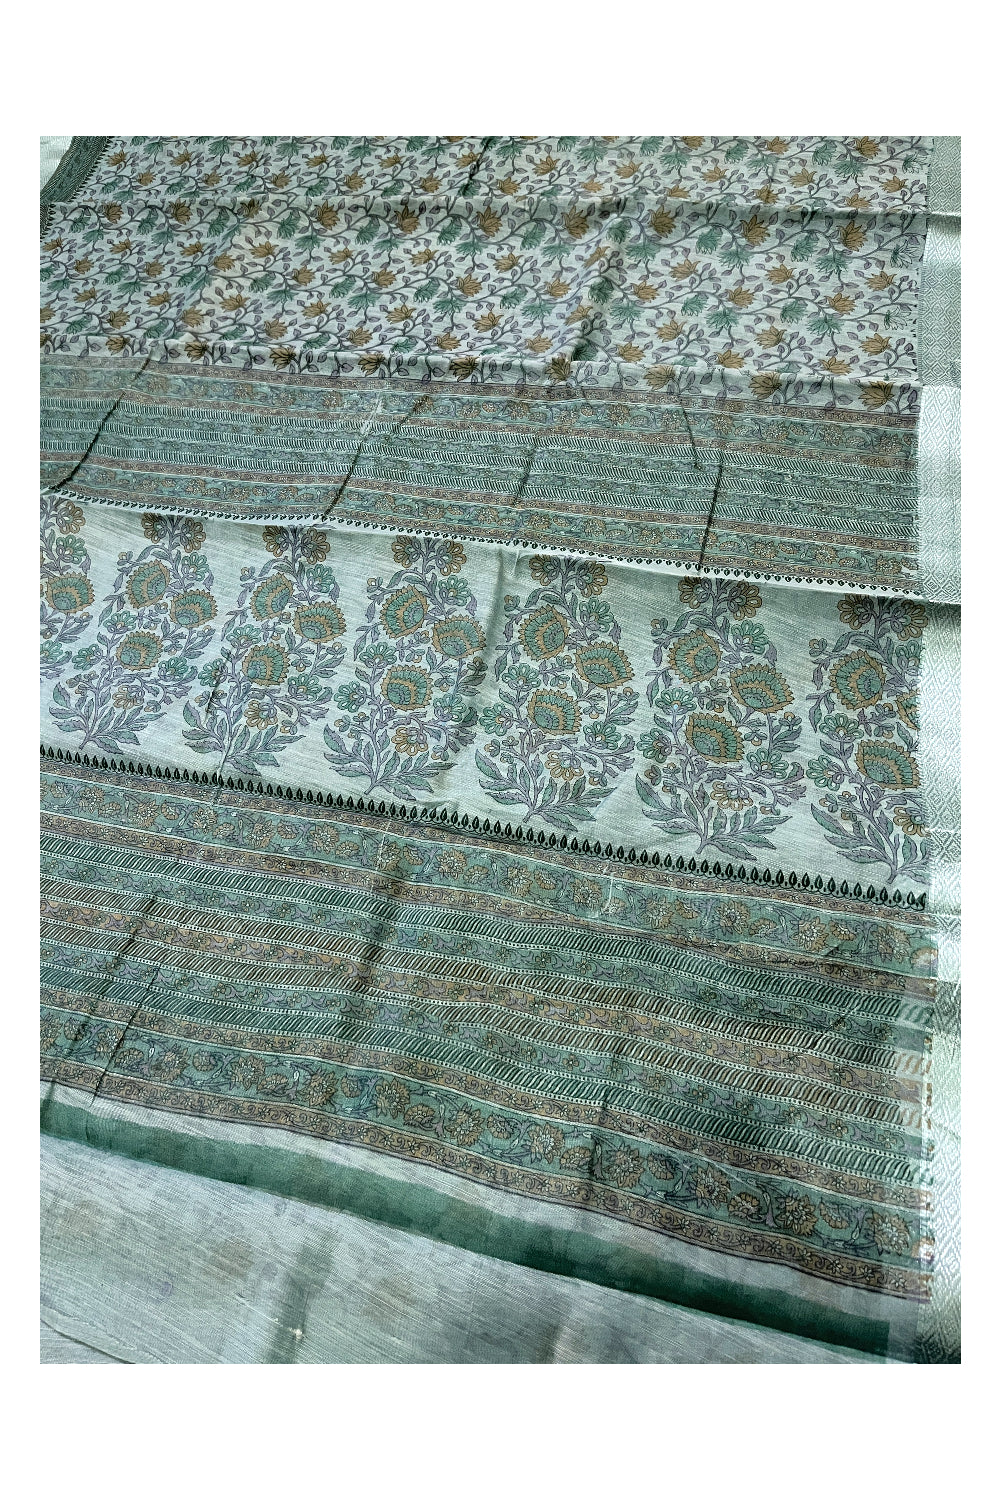 Southloom Cotton Green Floral Printed Saree